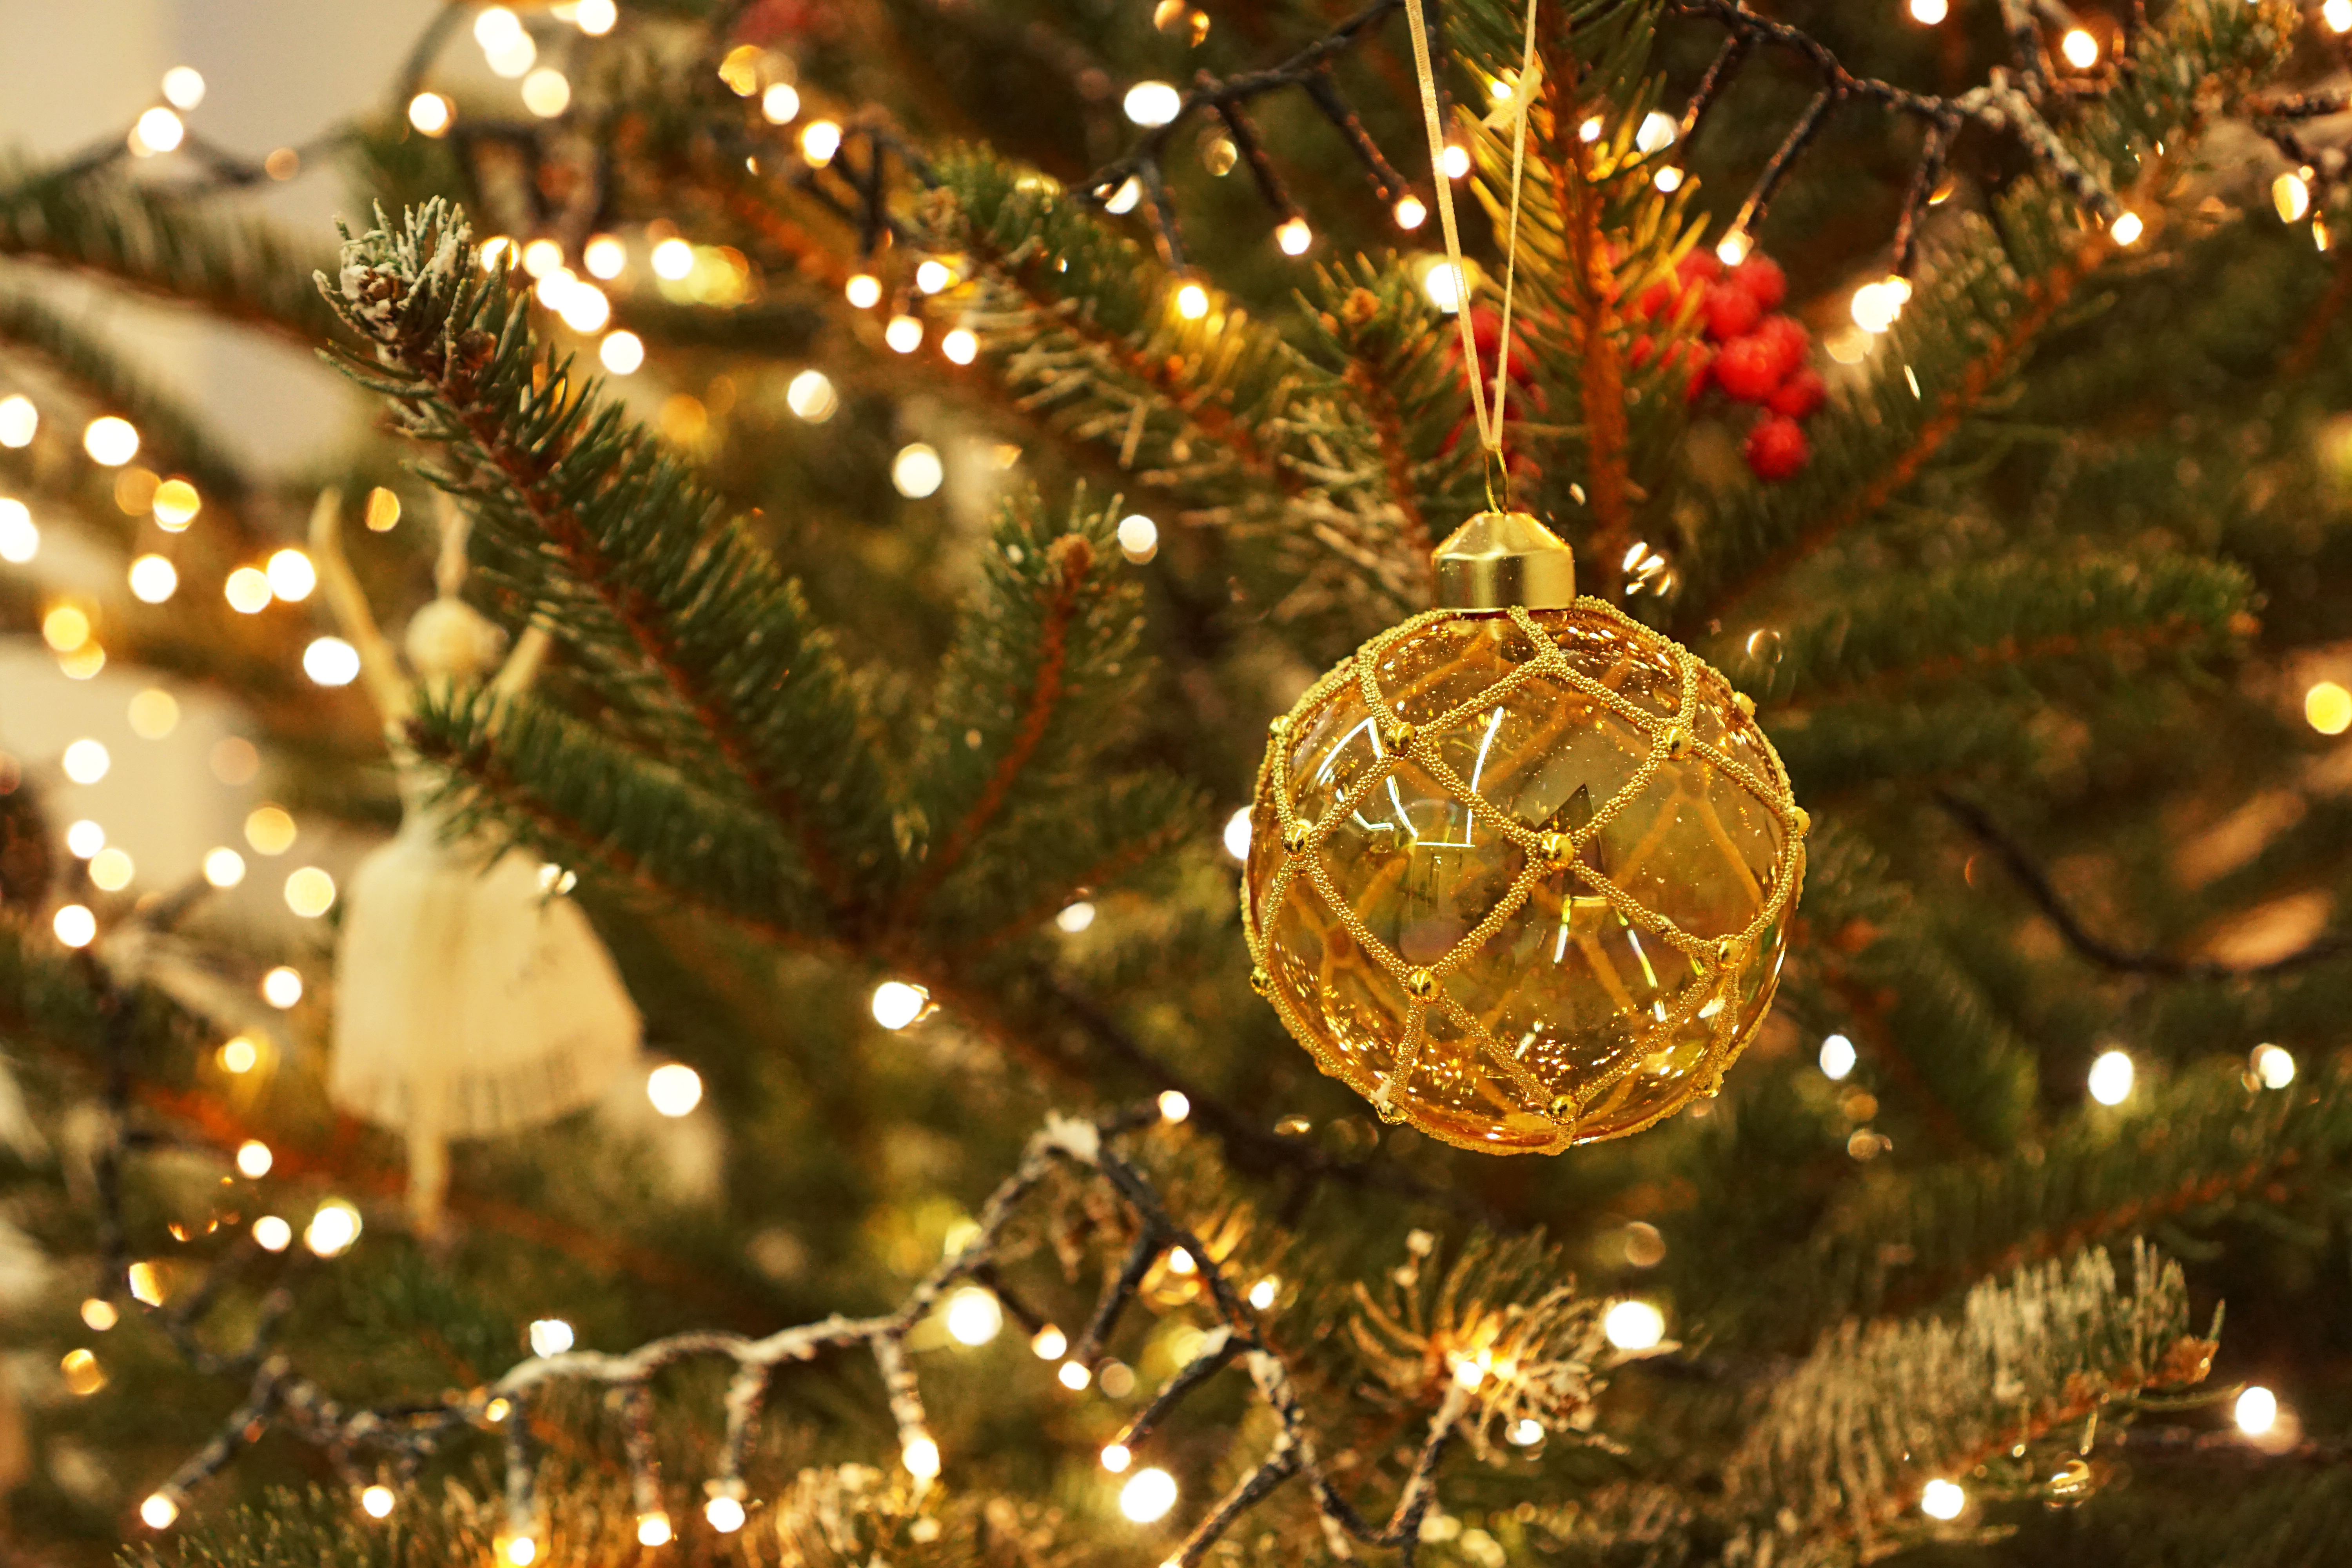 Real Christmas Tree Stock Photos, Images and Backgrounds for Free Download